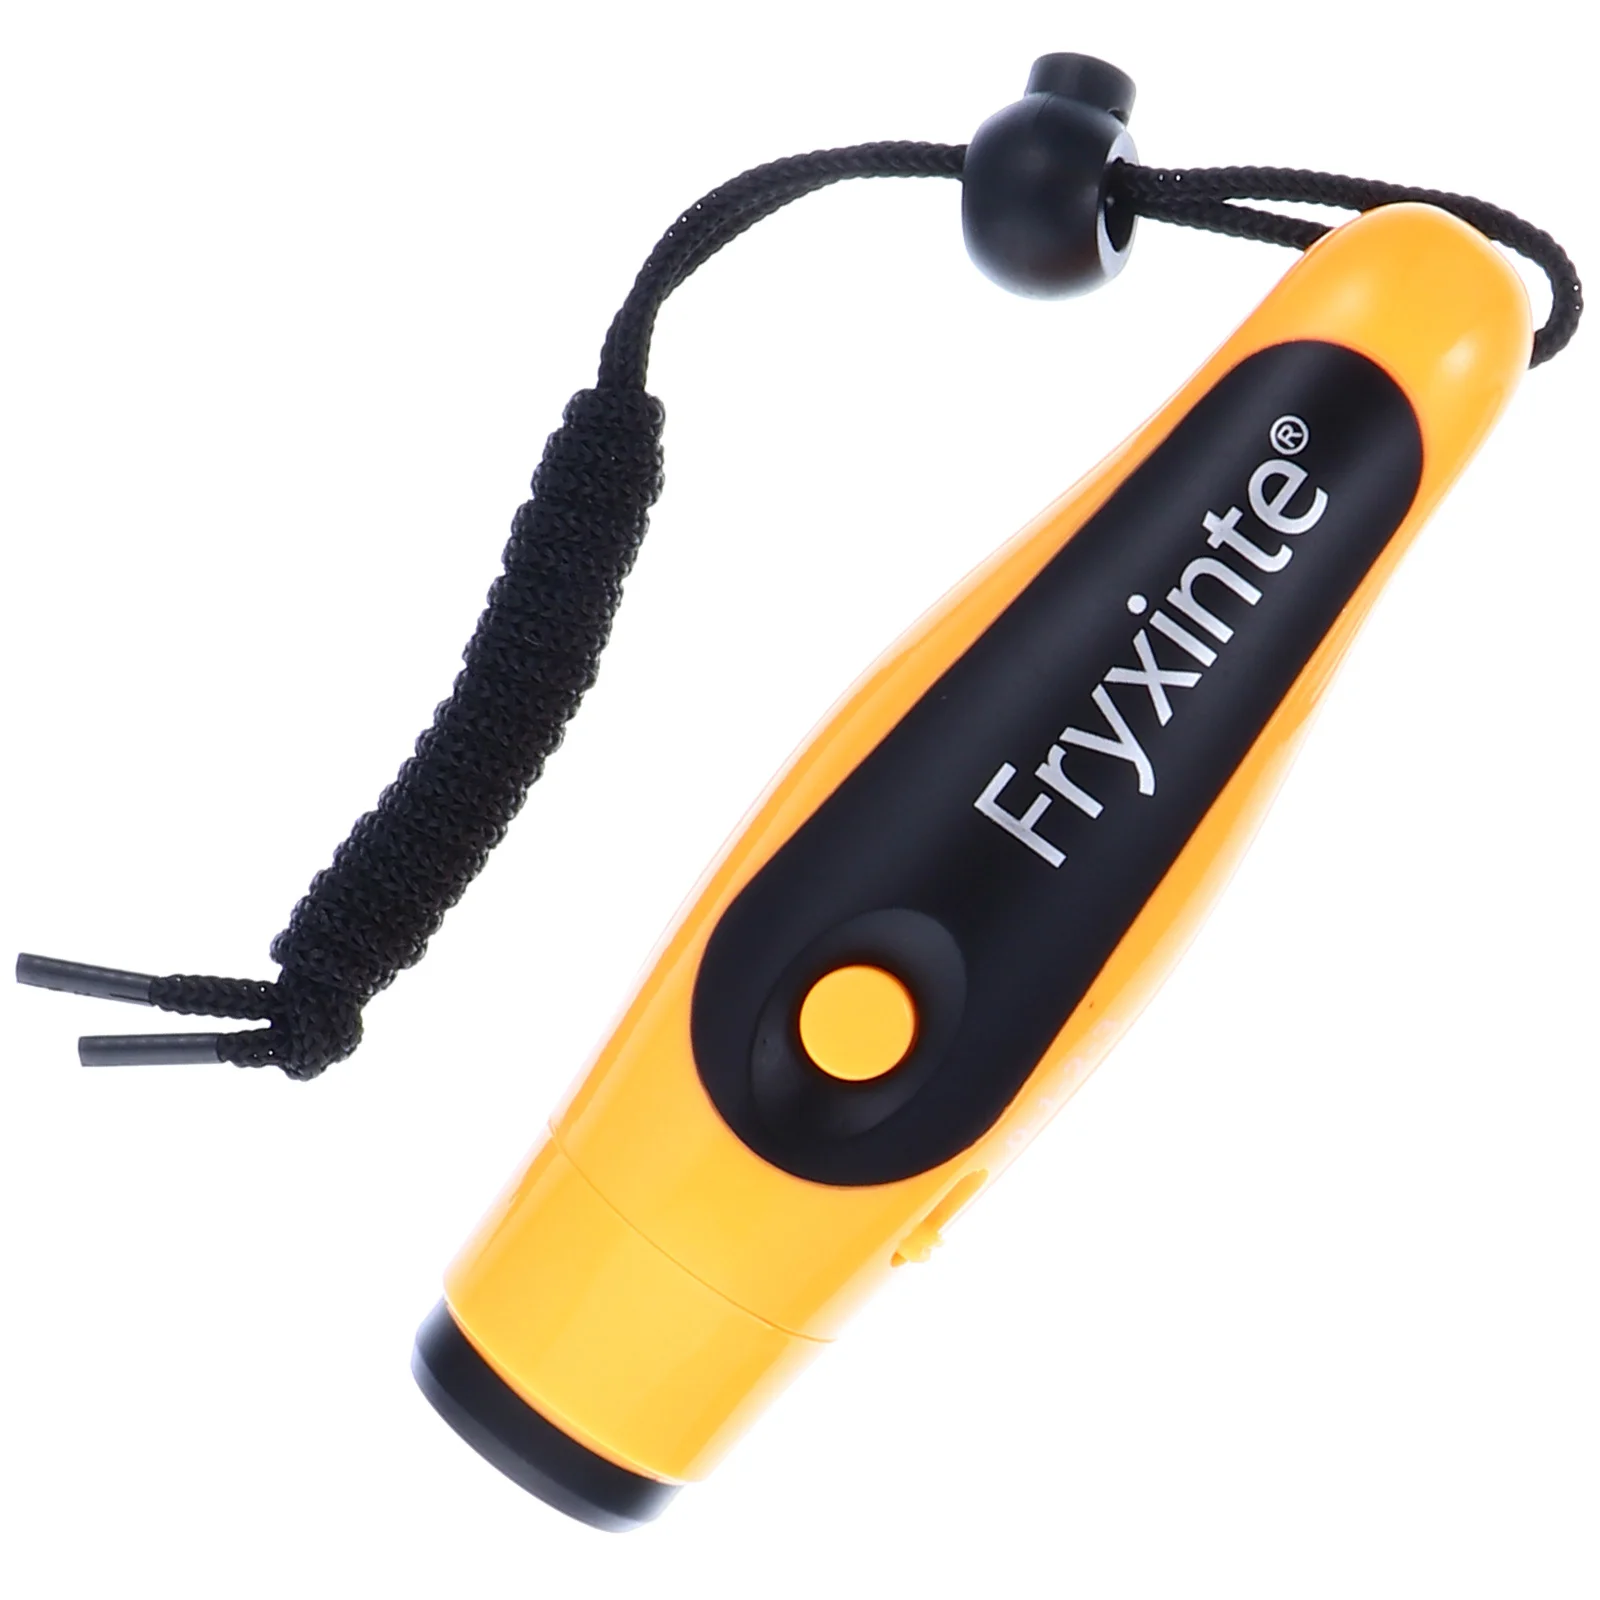 

Whistle Survival Match Sports Electric Basketball Handheld Safety Emergency Hiking High Portable Outdoor Boating Volume